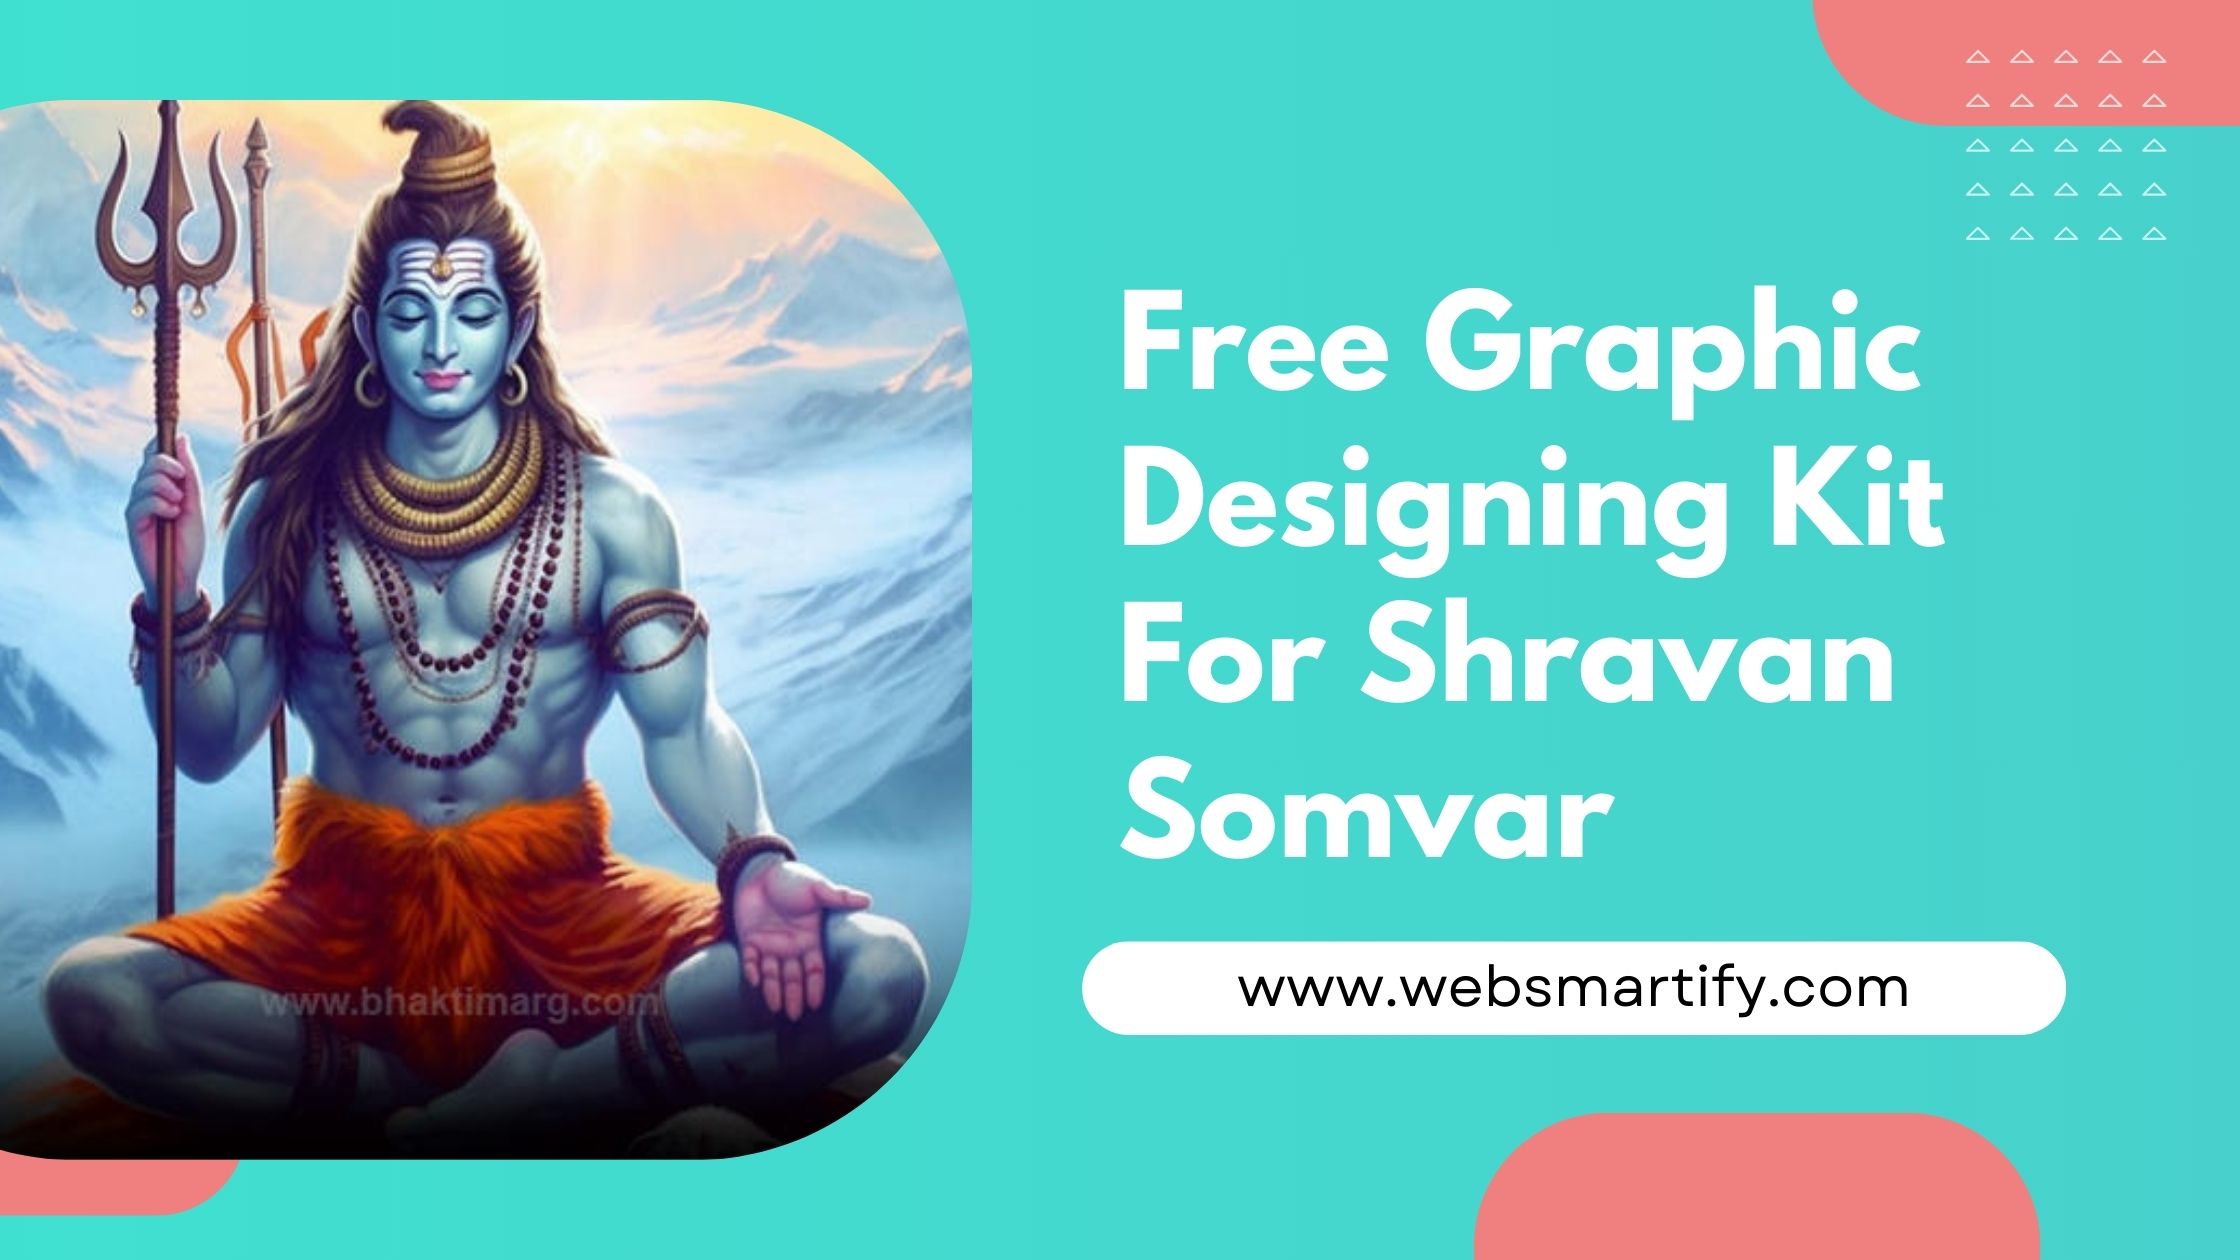 Graphic Designing Kit For Shravan Somvar with high-quality materials to enhance your festival designs - Websmartify